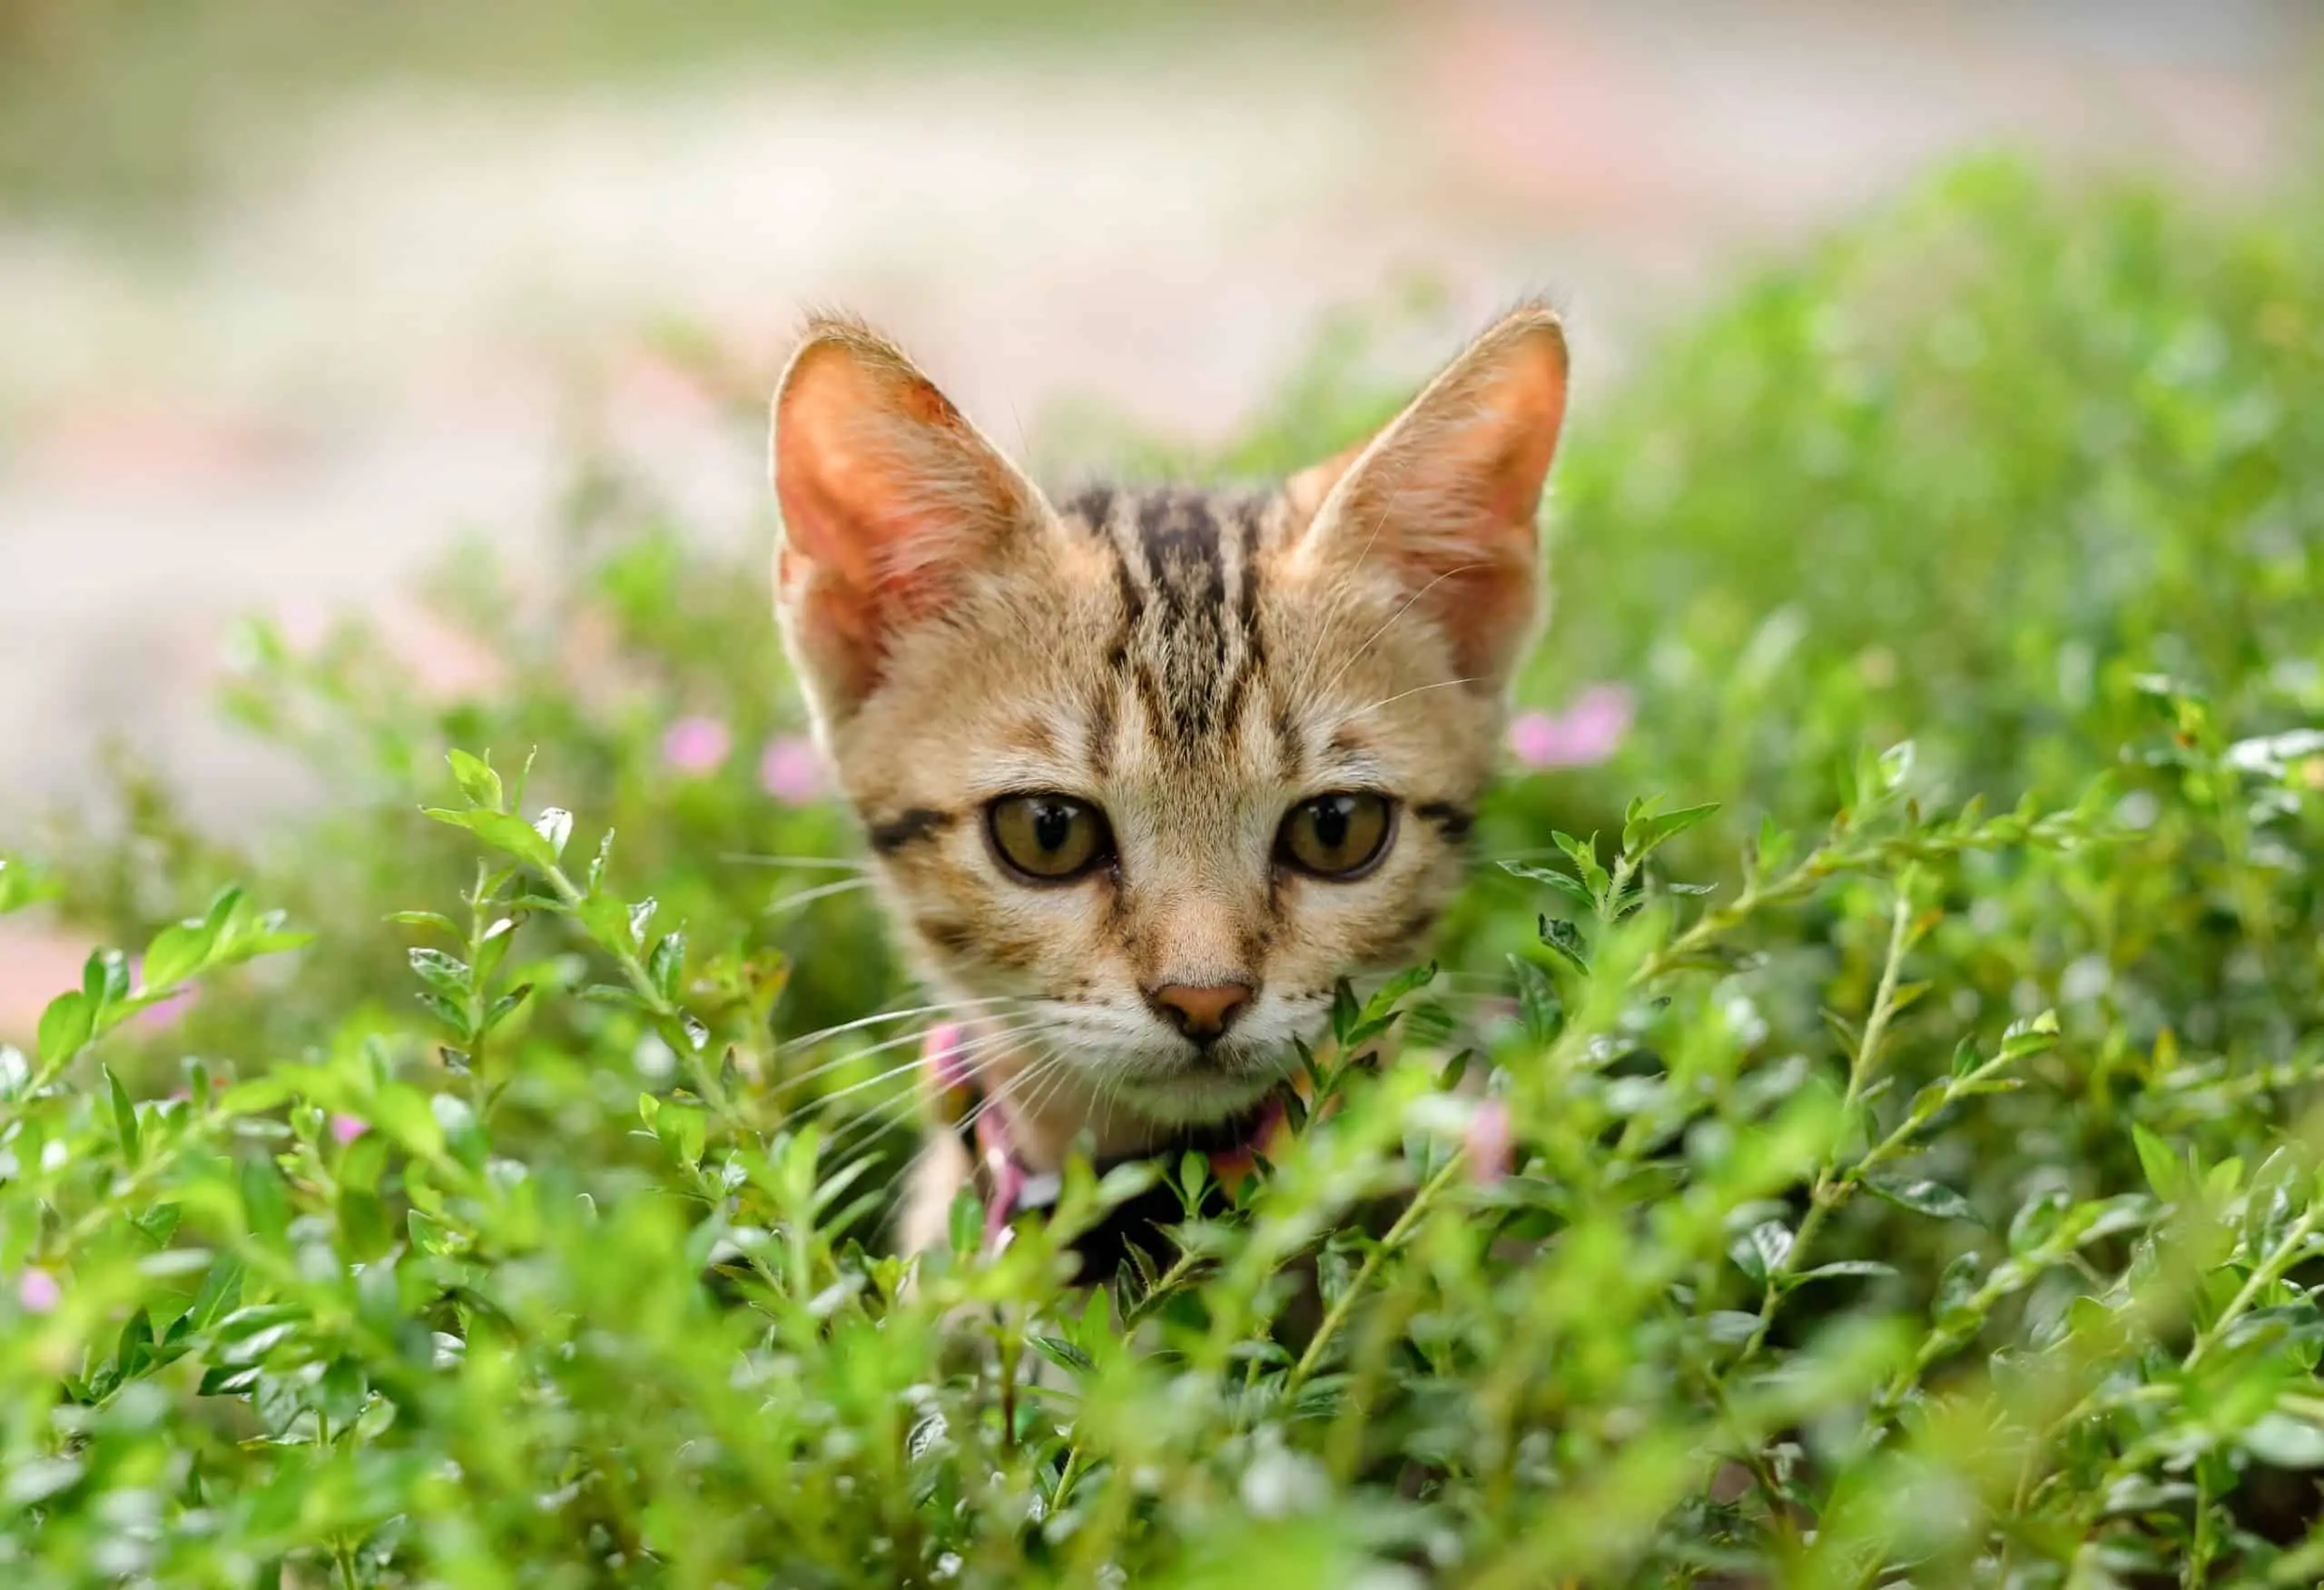 Kitten playing in a garden treated with a pet friendly weed killer